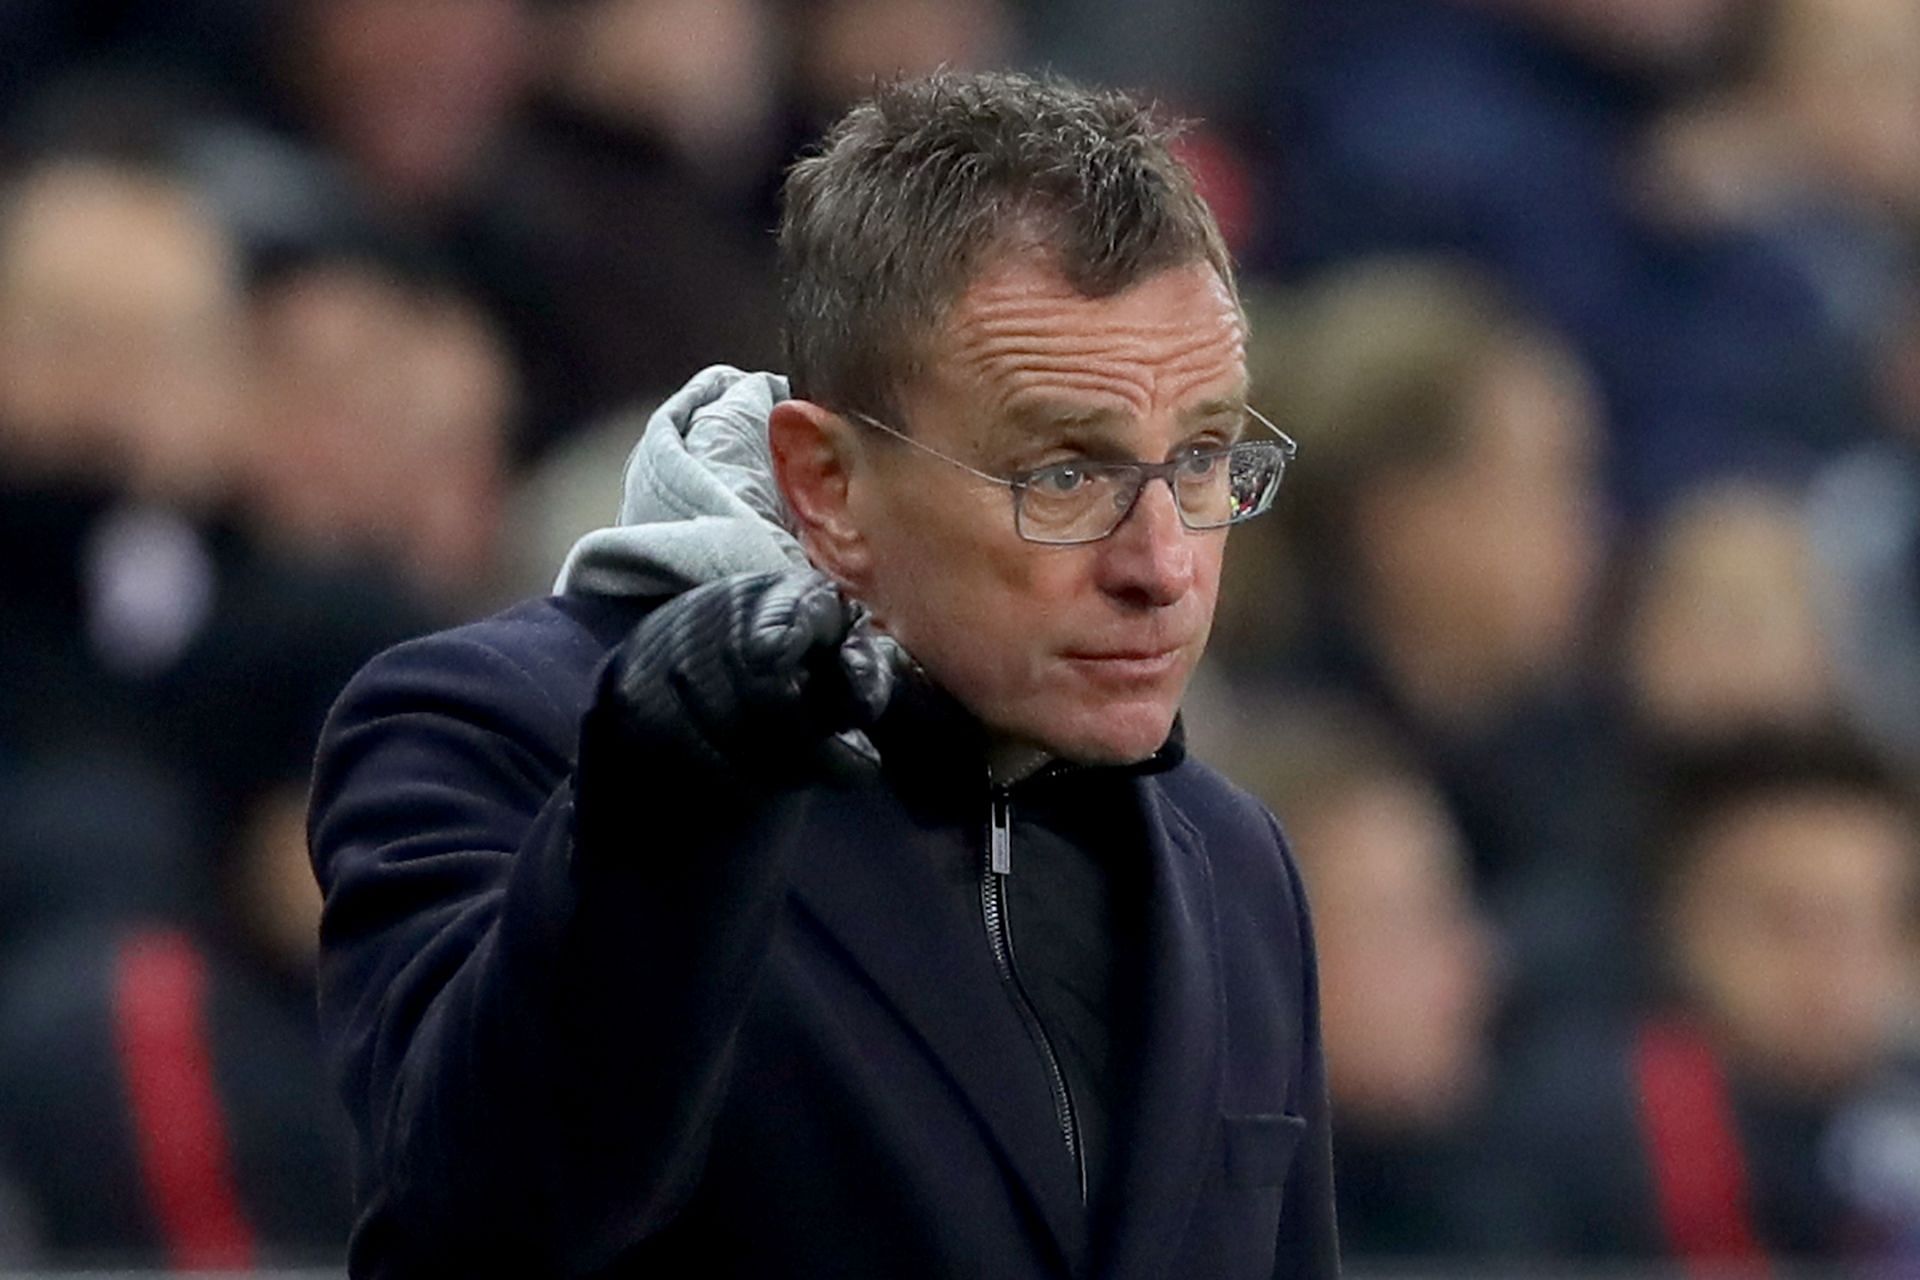 Ralf Rangnick has been appointed as the new Manchester United manager